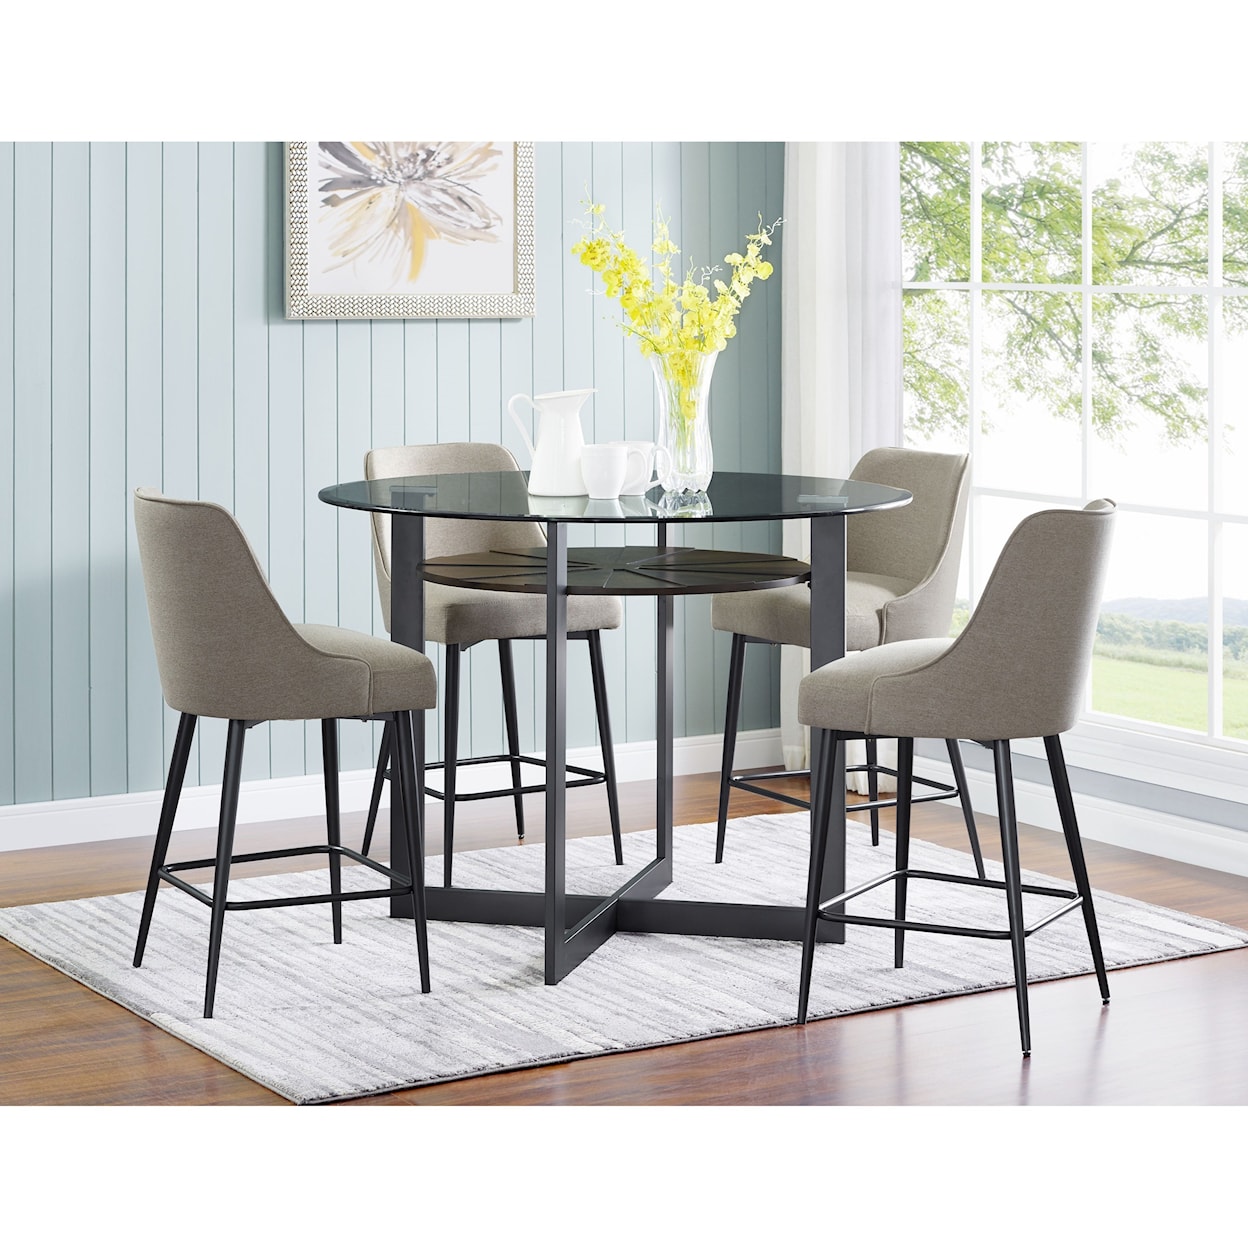 Prime Olson SS 5 Piece Counter Dining Set